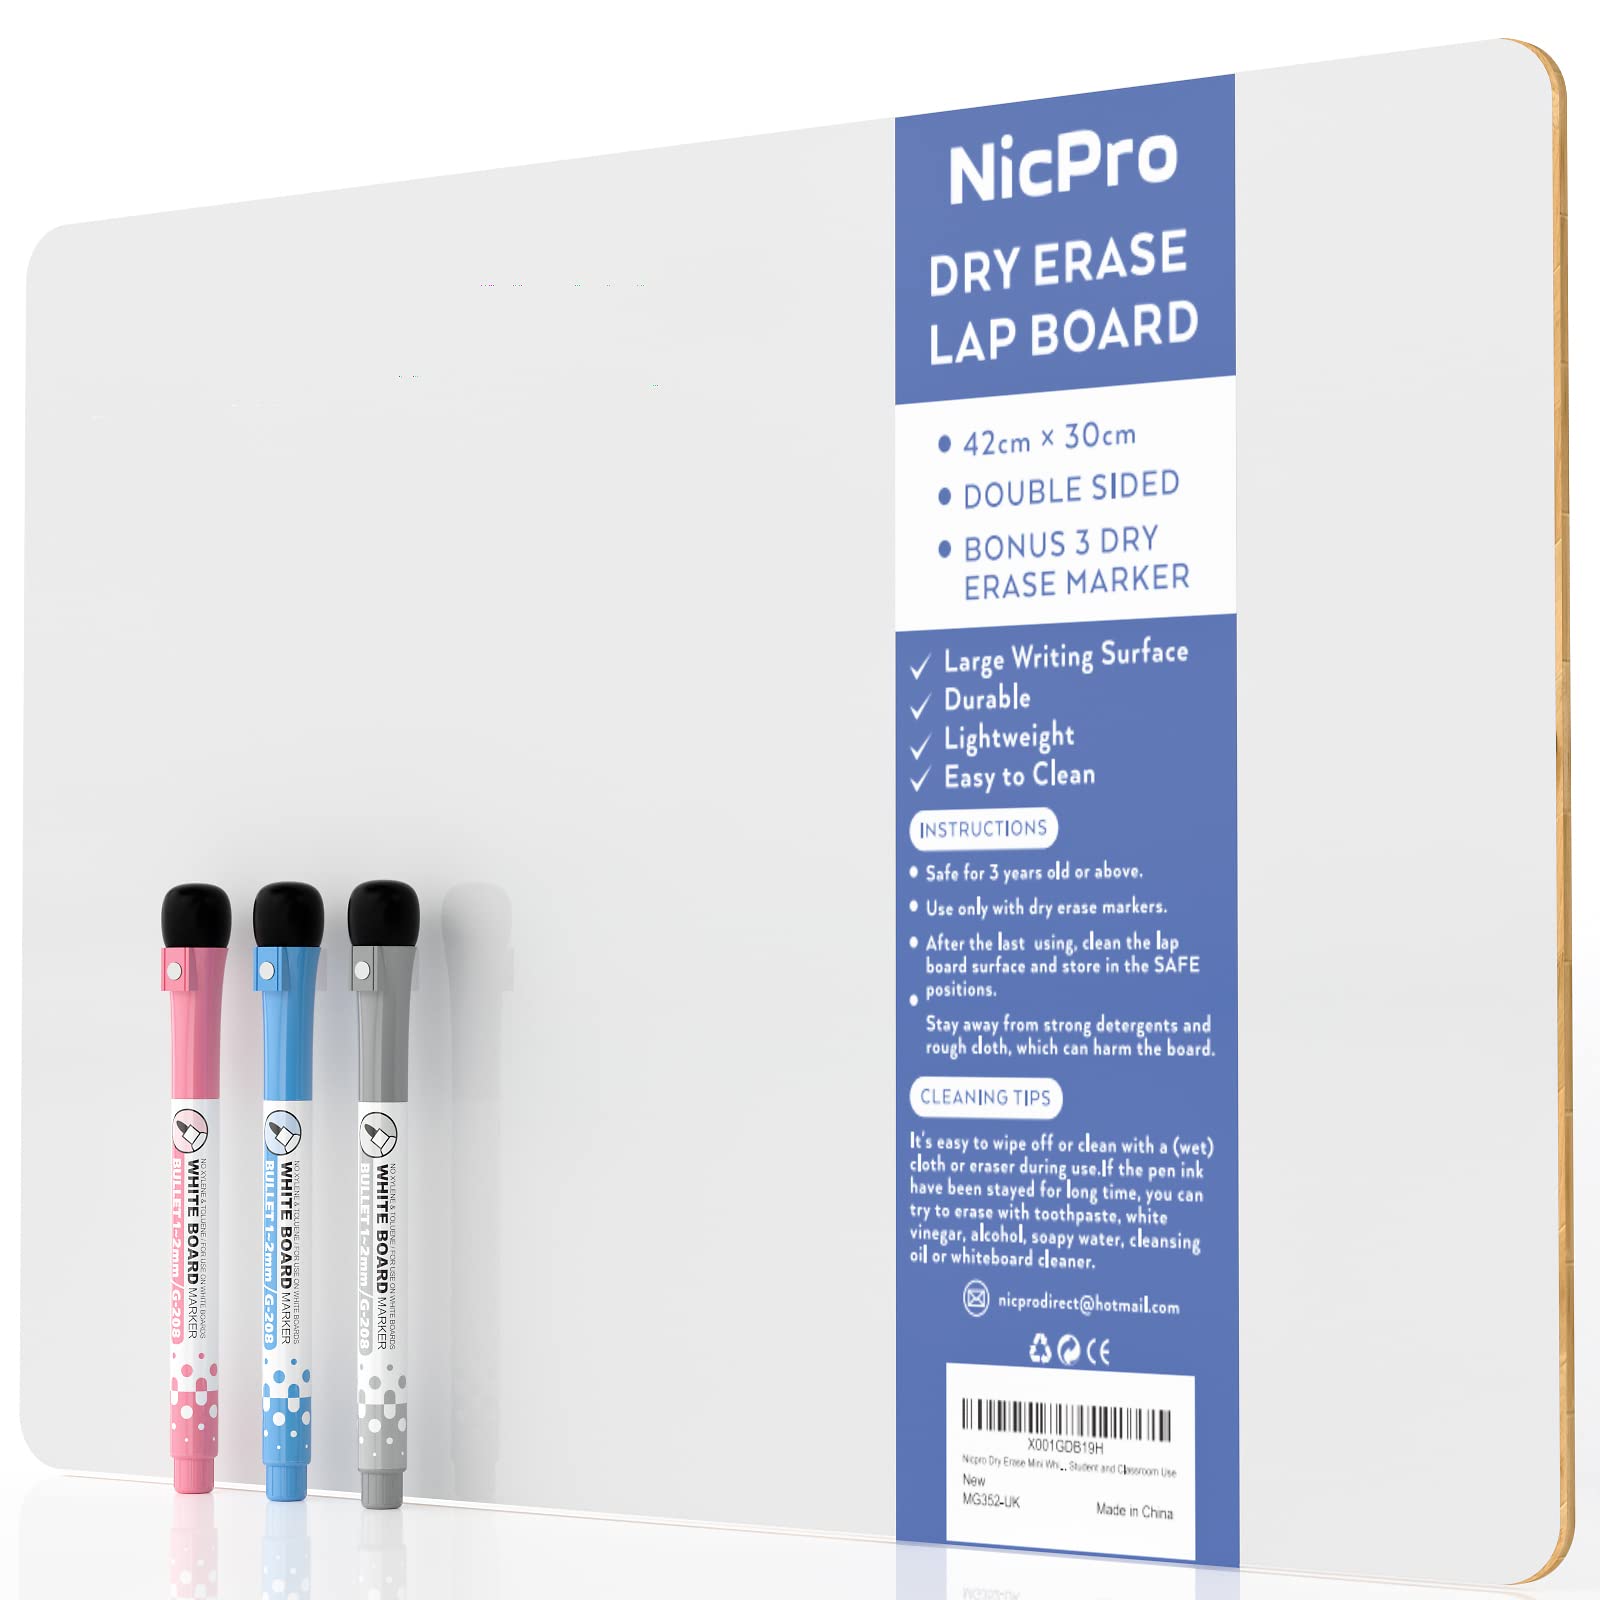 Nicpro 12 x 16 inches Lapboard Small Dry Erase Lap Board Double Sided